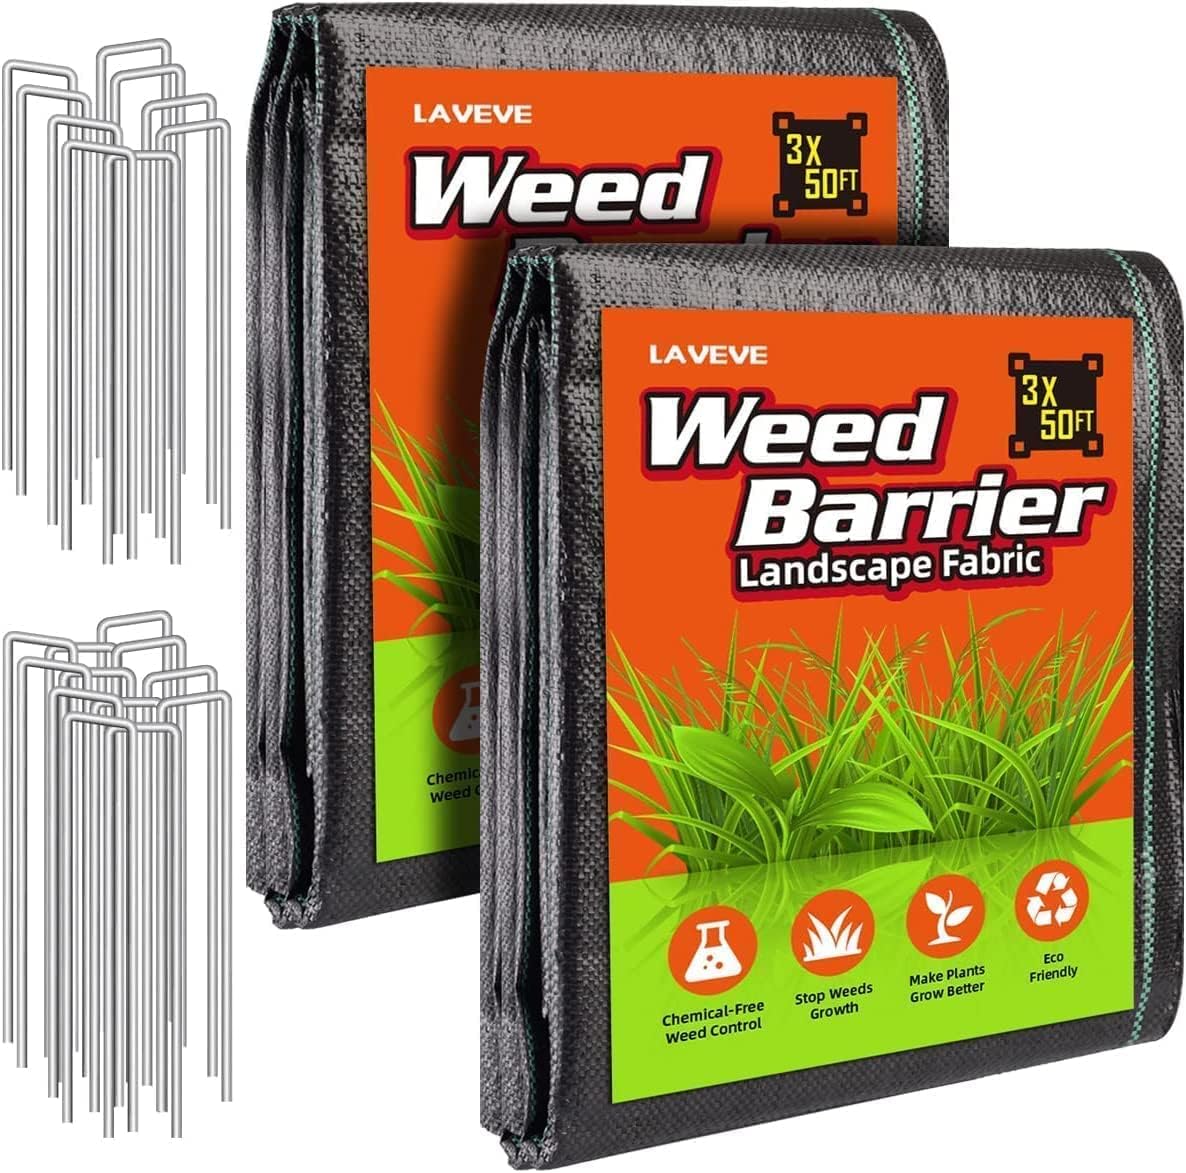 LAVEVE 3FTx 100FT Weed Barrier Landscape Fabric, 3.2oz [...]